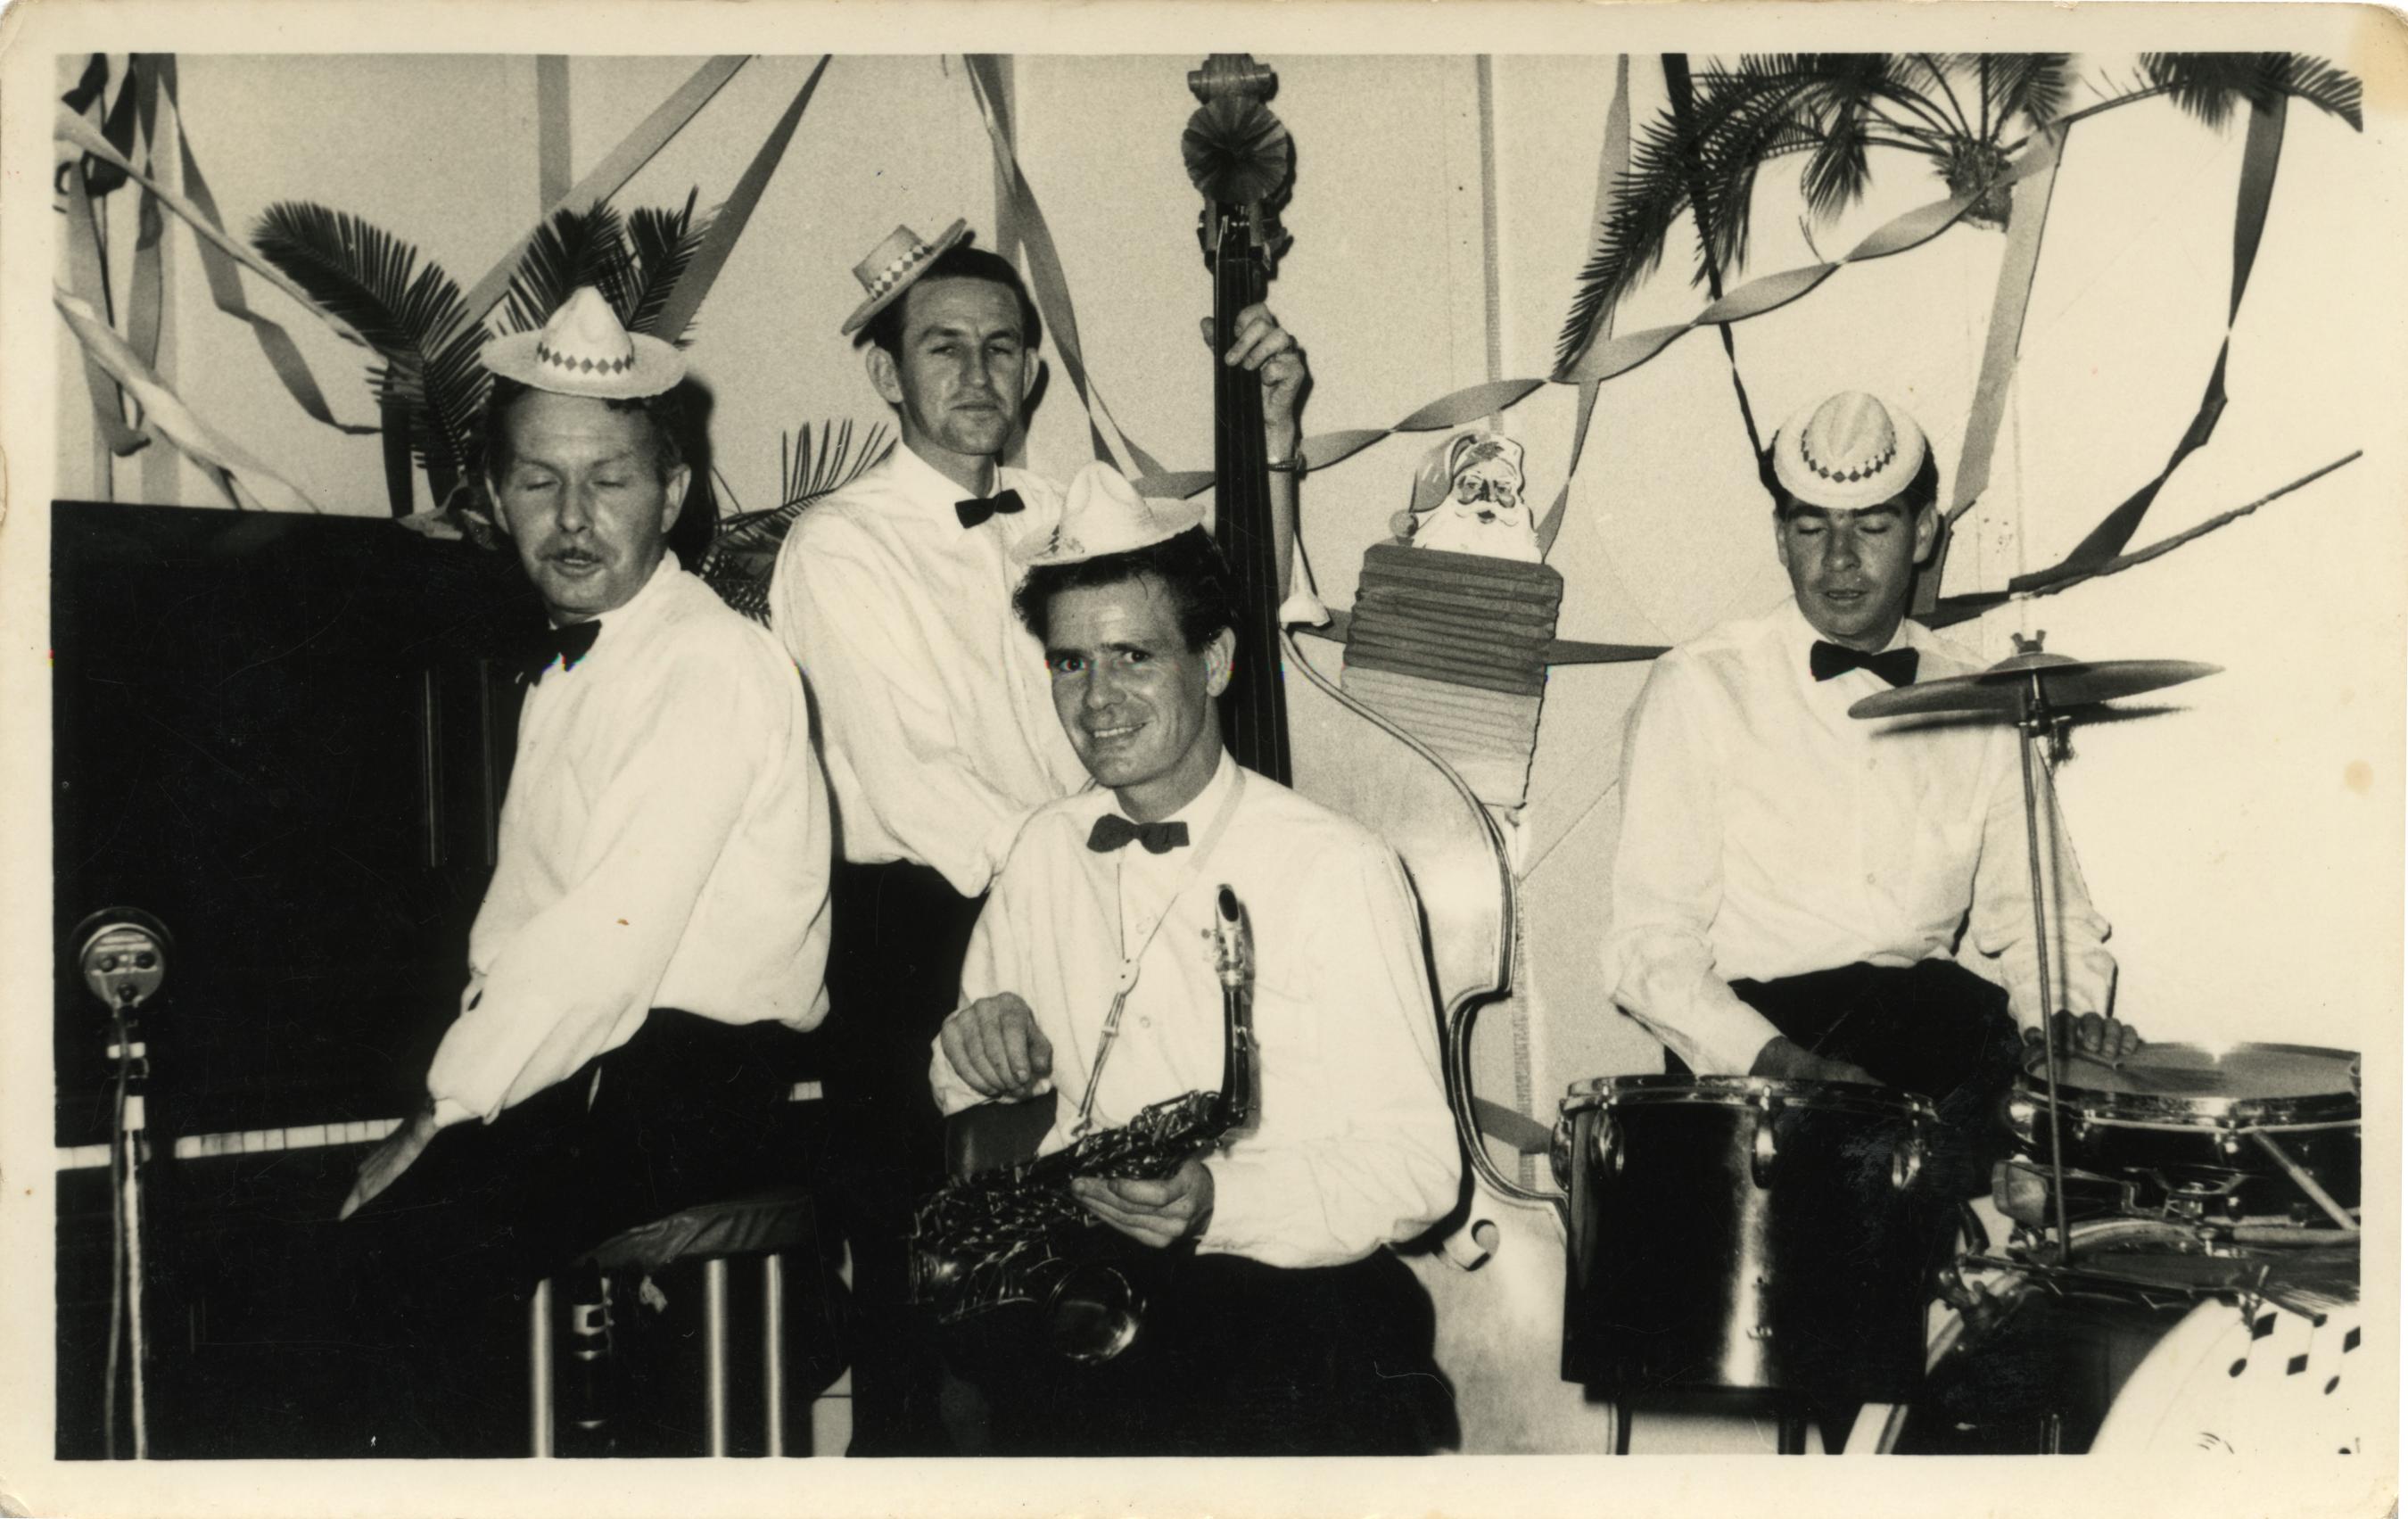 Black and white photo of four men dressing in white shirt and bow ties playing musical instruments. in